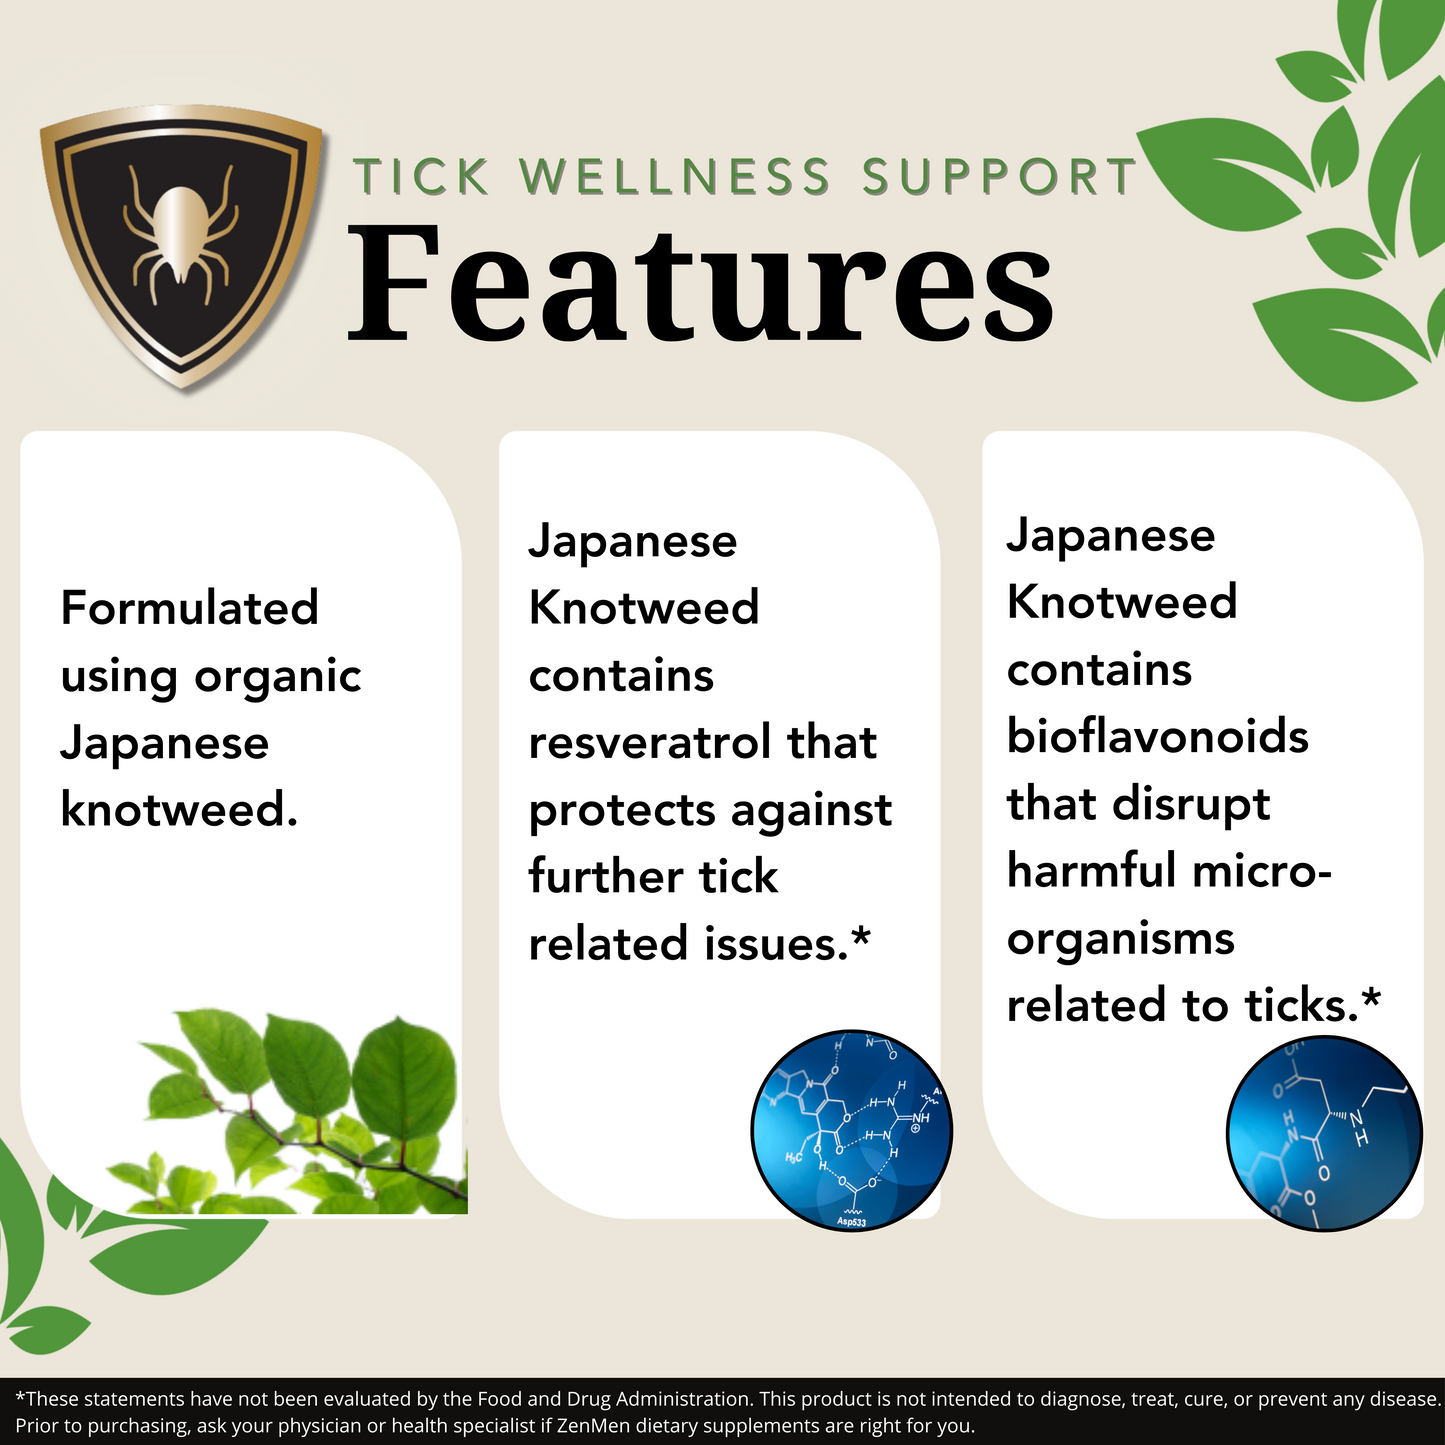 JAPANESE KNOTWEED SUPPLEMENT